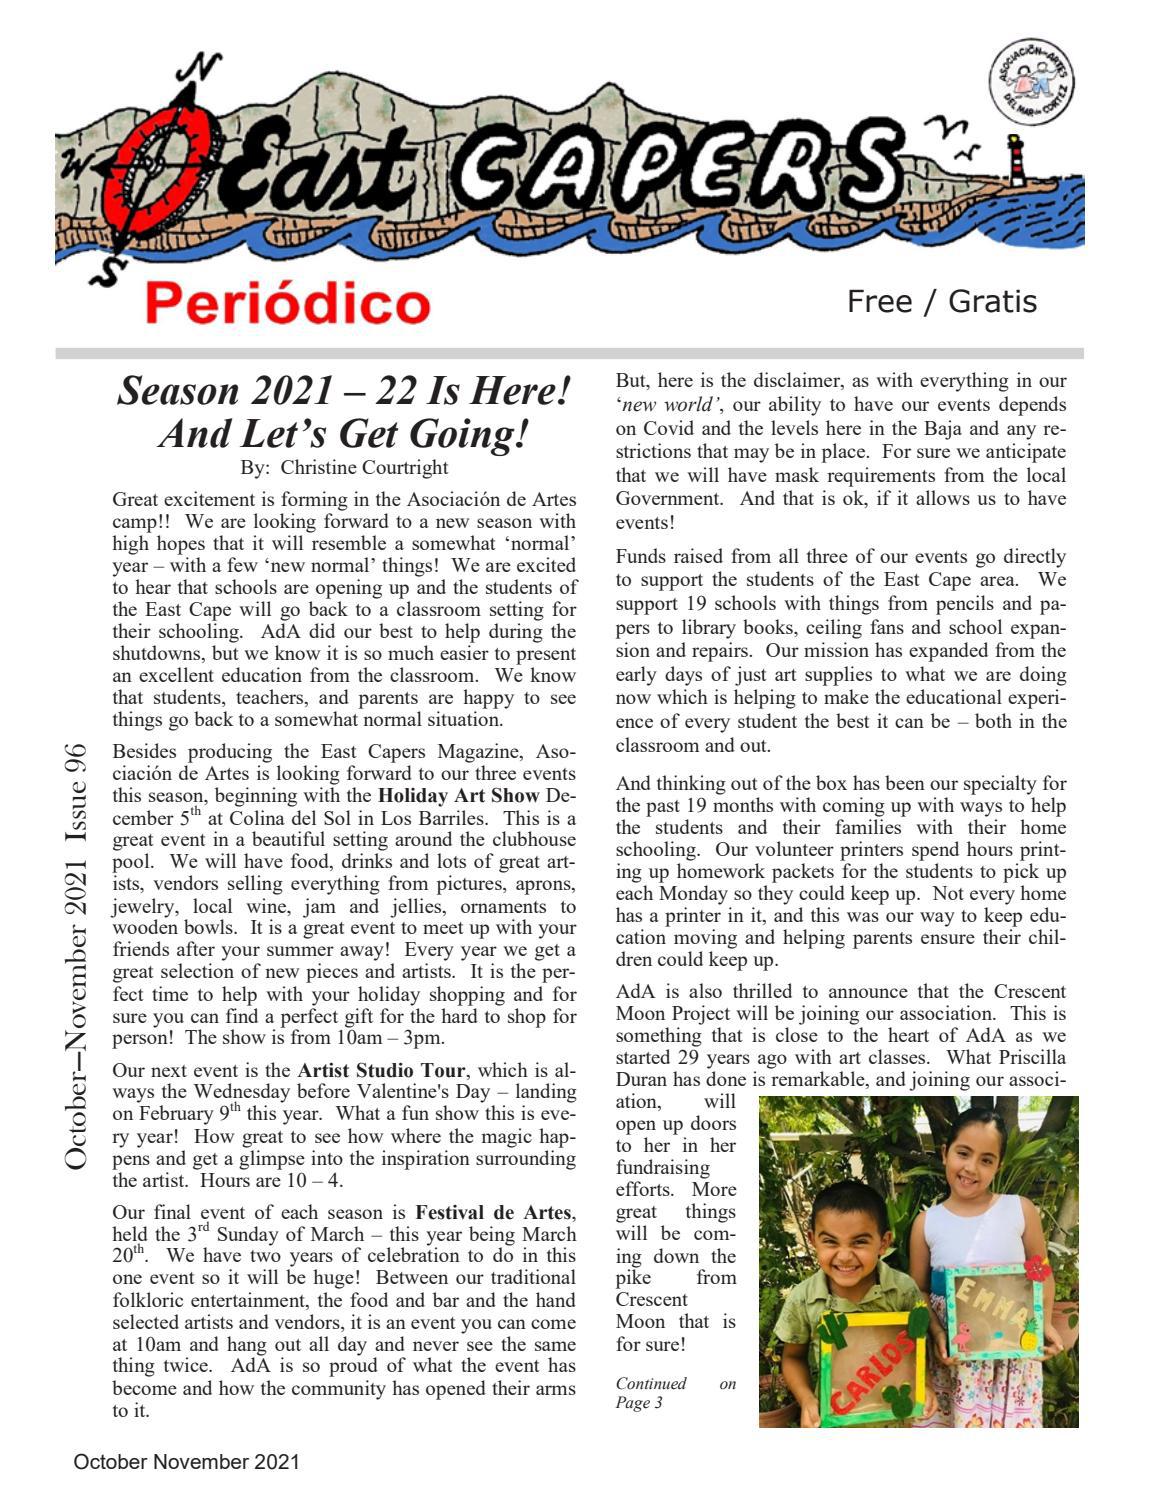 East Capers magazine October-November 2021 Issue 96